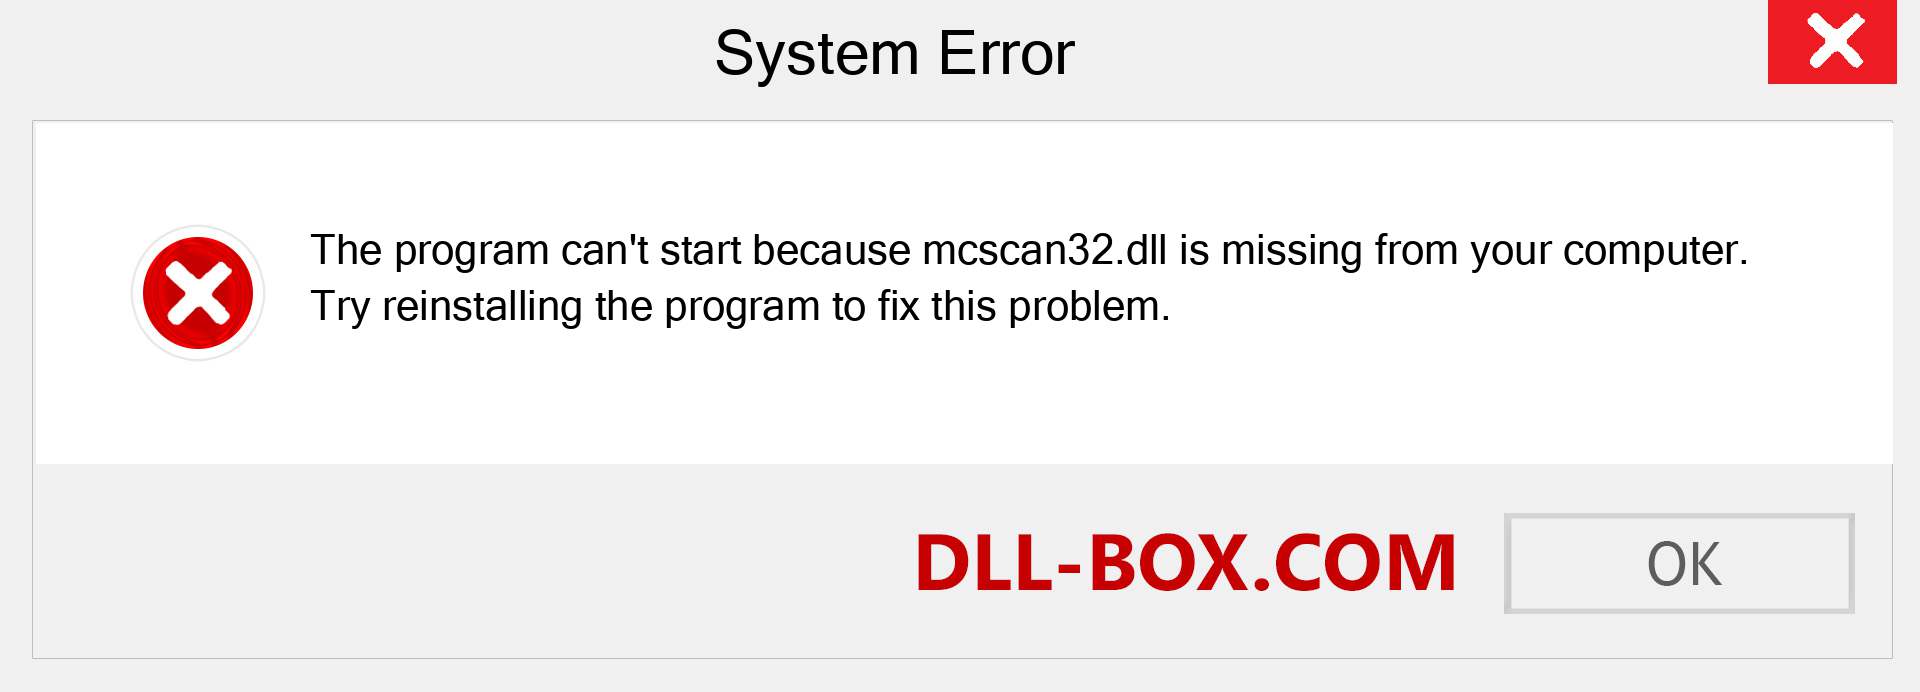  mcscan32.dll file is missing?. Download for Windows 7, 8, 10 - Fix  mcscan32 dll Missing Error on Windows, photos, images